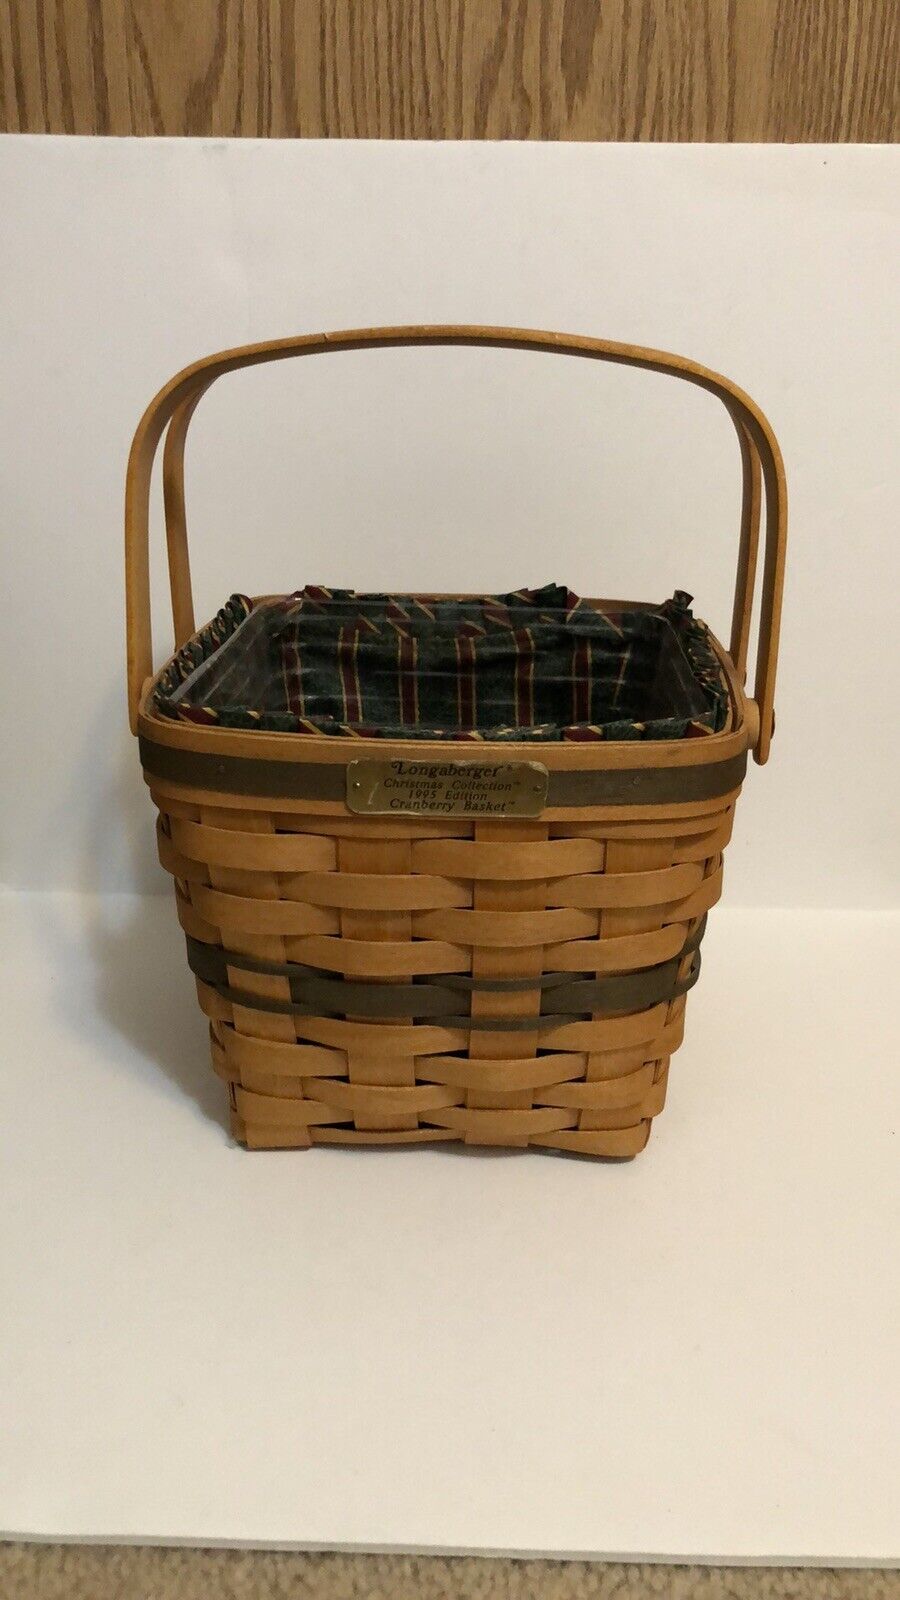 1995 Longaberger Christmas Collection Edition Cranberry Basket with Liner